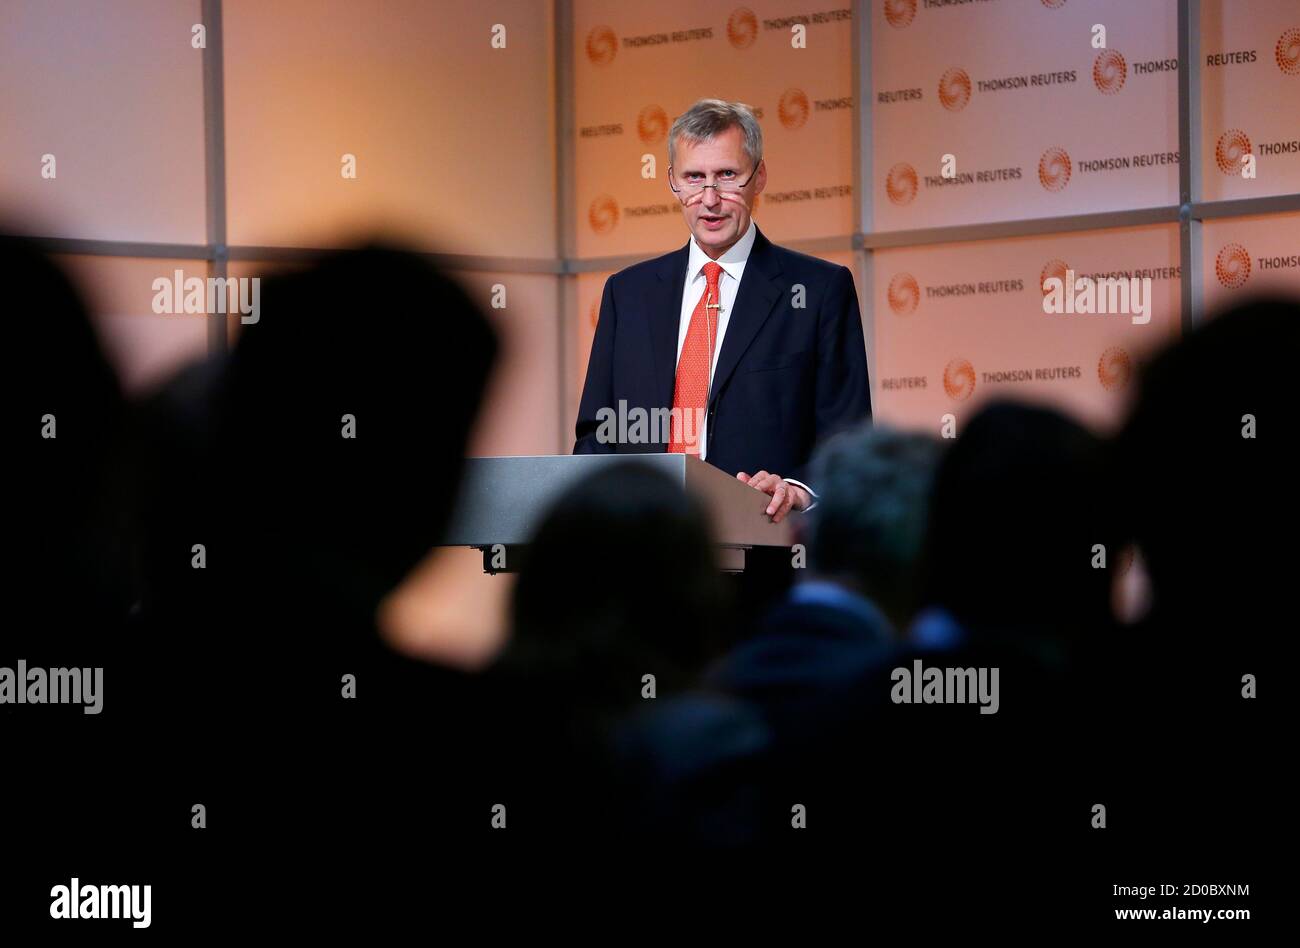 Martin Wheatley, managing director of Britain's Financial Services Authority (FSA) and CEO designate of the Financial Conduct Authority, speaks at a Thomson Reuters Newsmaker event, in the Canary Wharf business district of east London October 16, 2012.      REUTERS/Andrew Winning (BRITAIN - Tags: BUSINESS POLITICS) Stock Photo